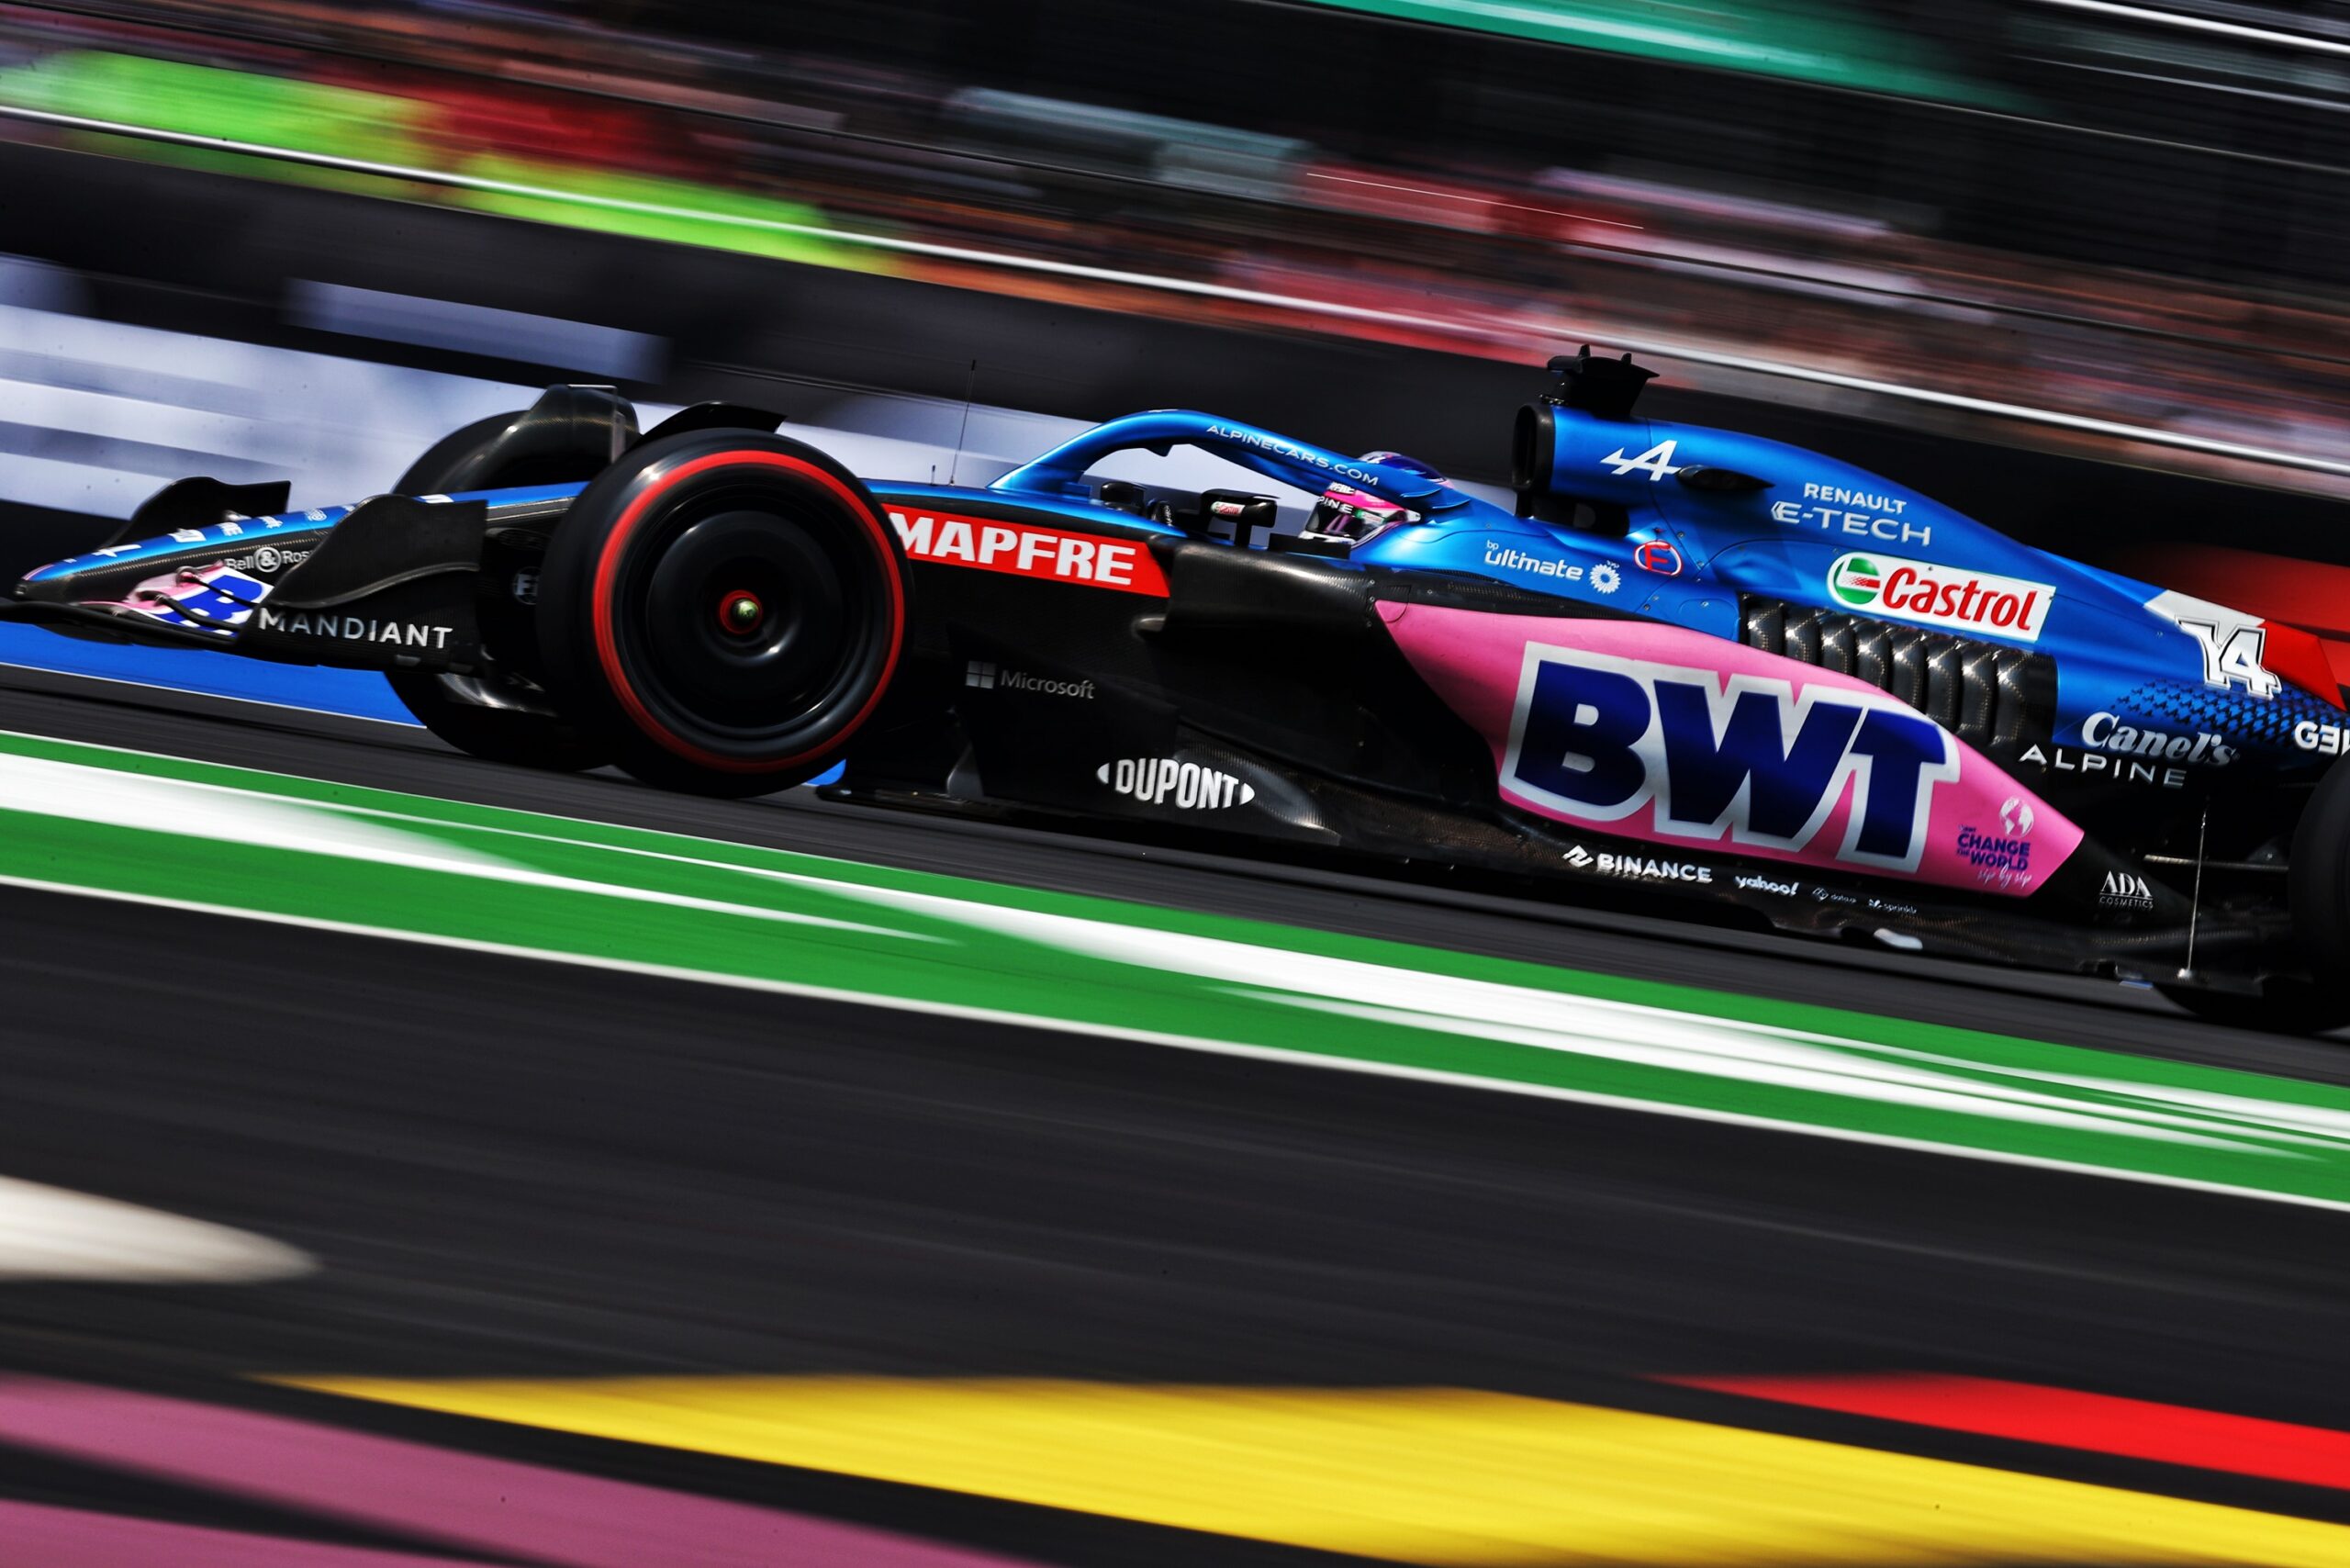 Faster data, faster car How BWT Alpine F1 Team aims to lead the Formula 1 tech race